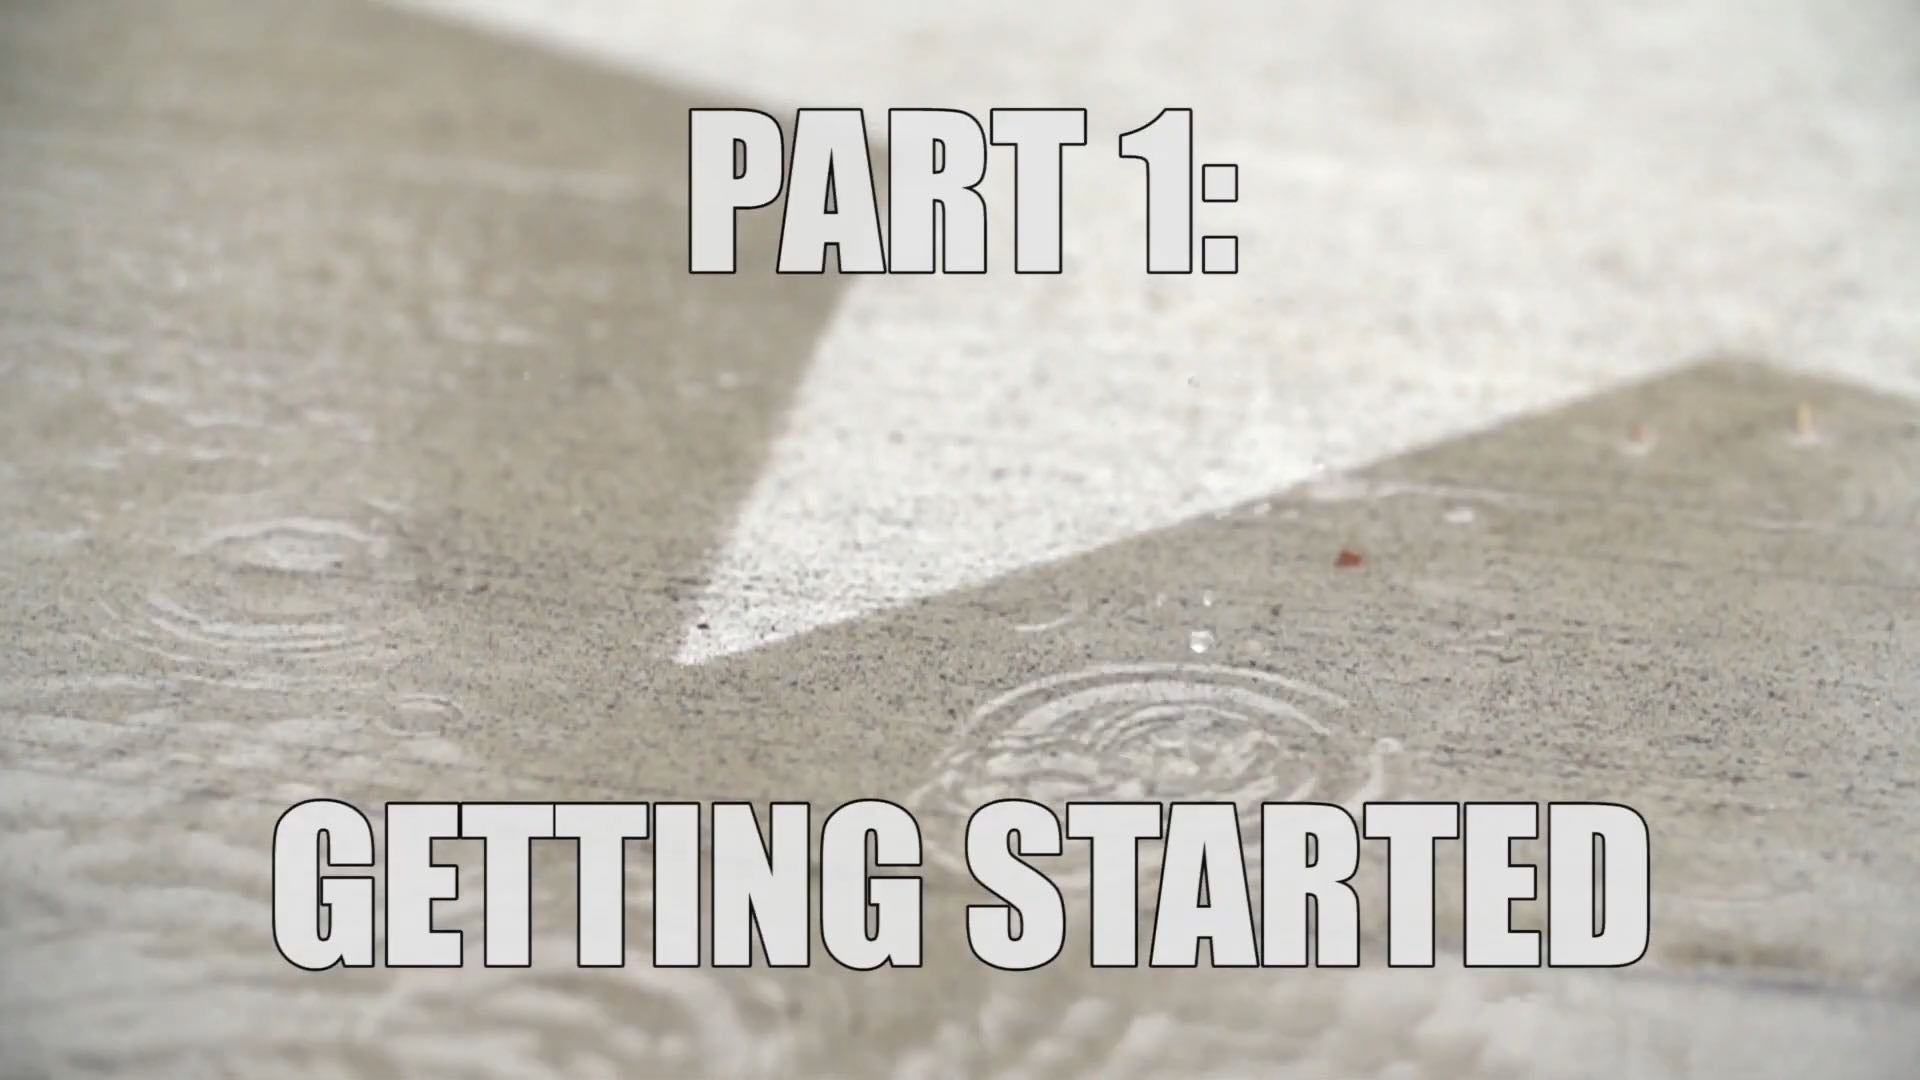 Load video: Video 1 of 4: Getting Started